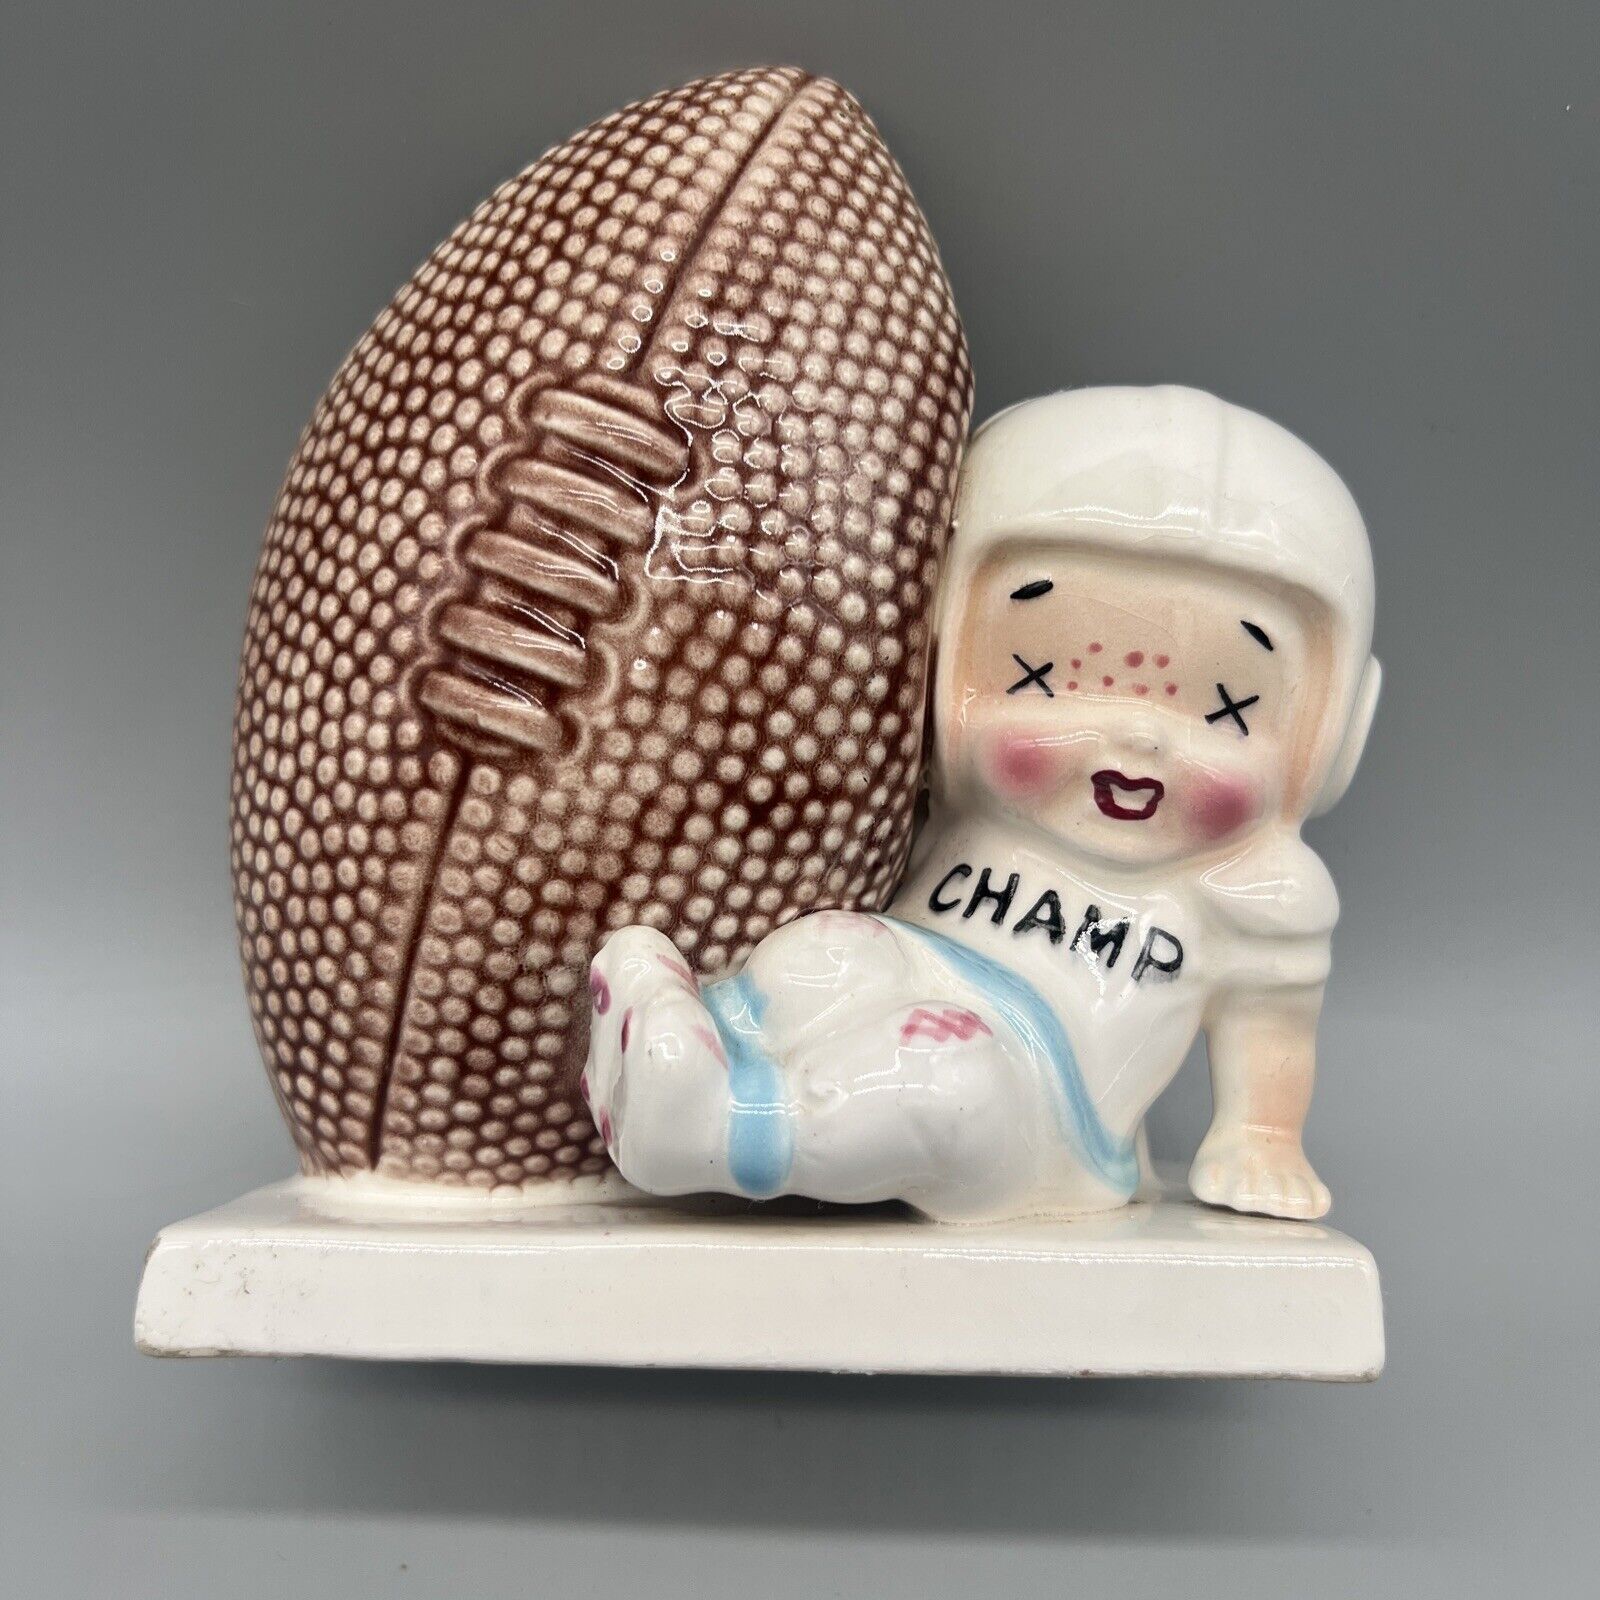 Vintage Baby Gift Japan Ceramic Pottery Champ Football Planter Pot Inarco MCM